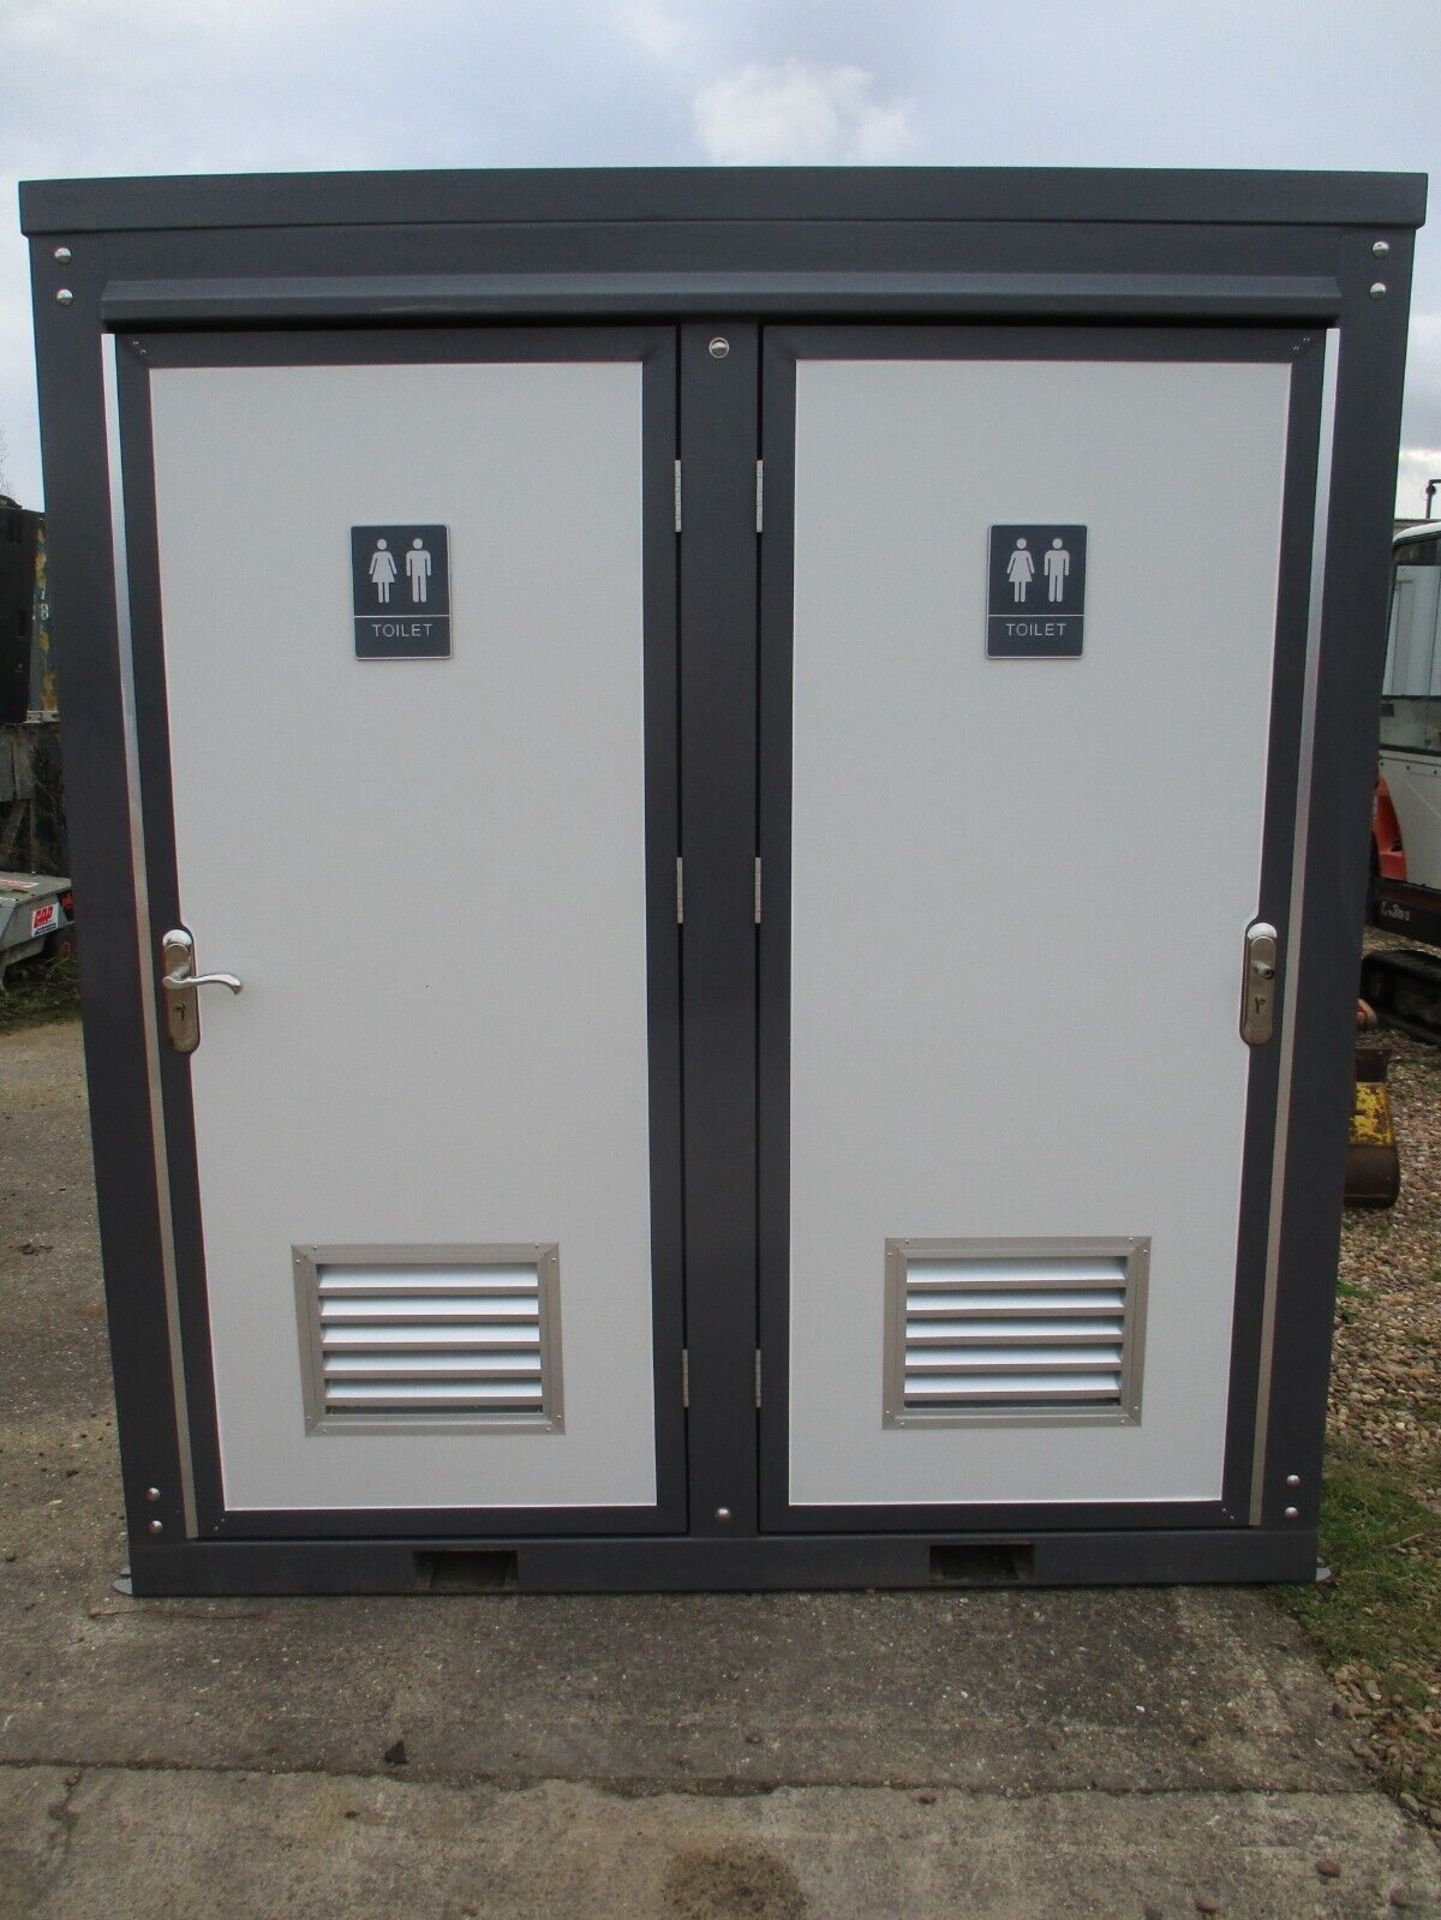 2.15M X 1.3M DOUBLE TOILET BLOCK SECURE SHIPPING CONTAINER DELIVERY ARRANGED